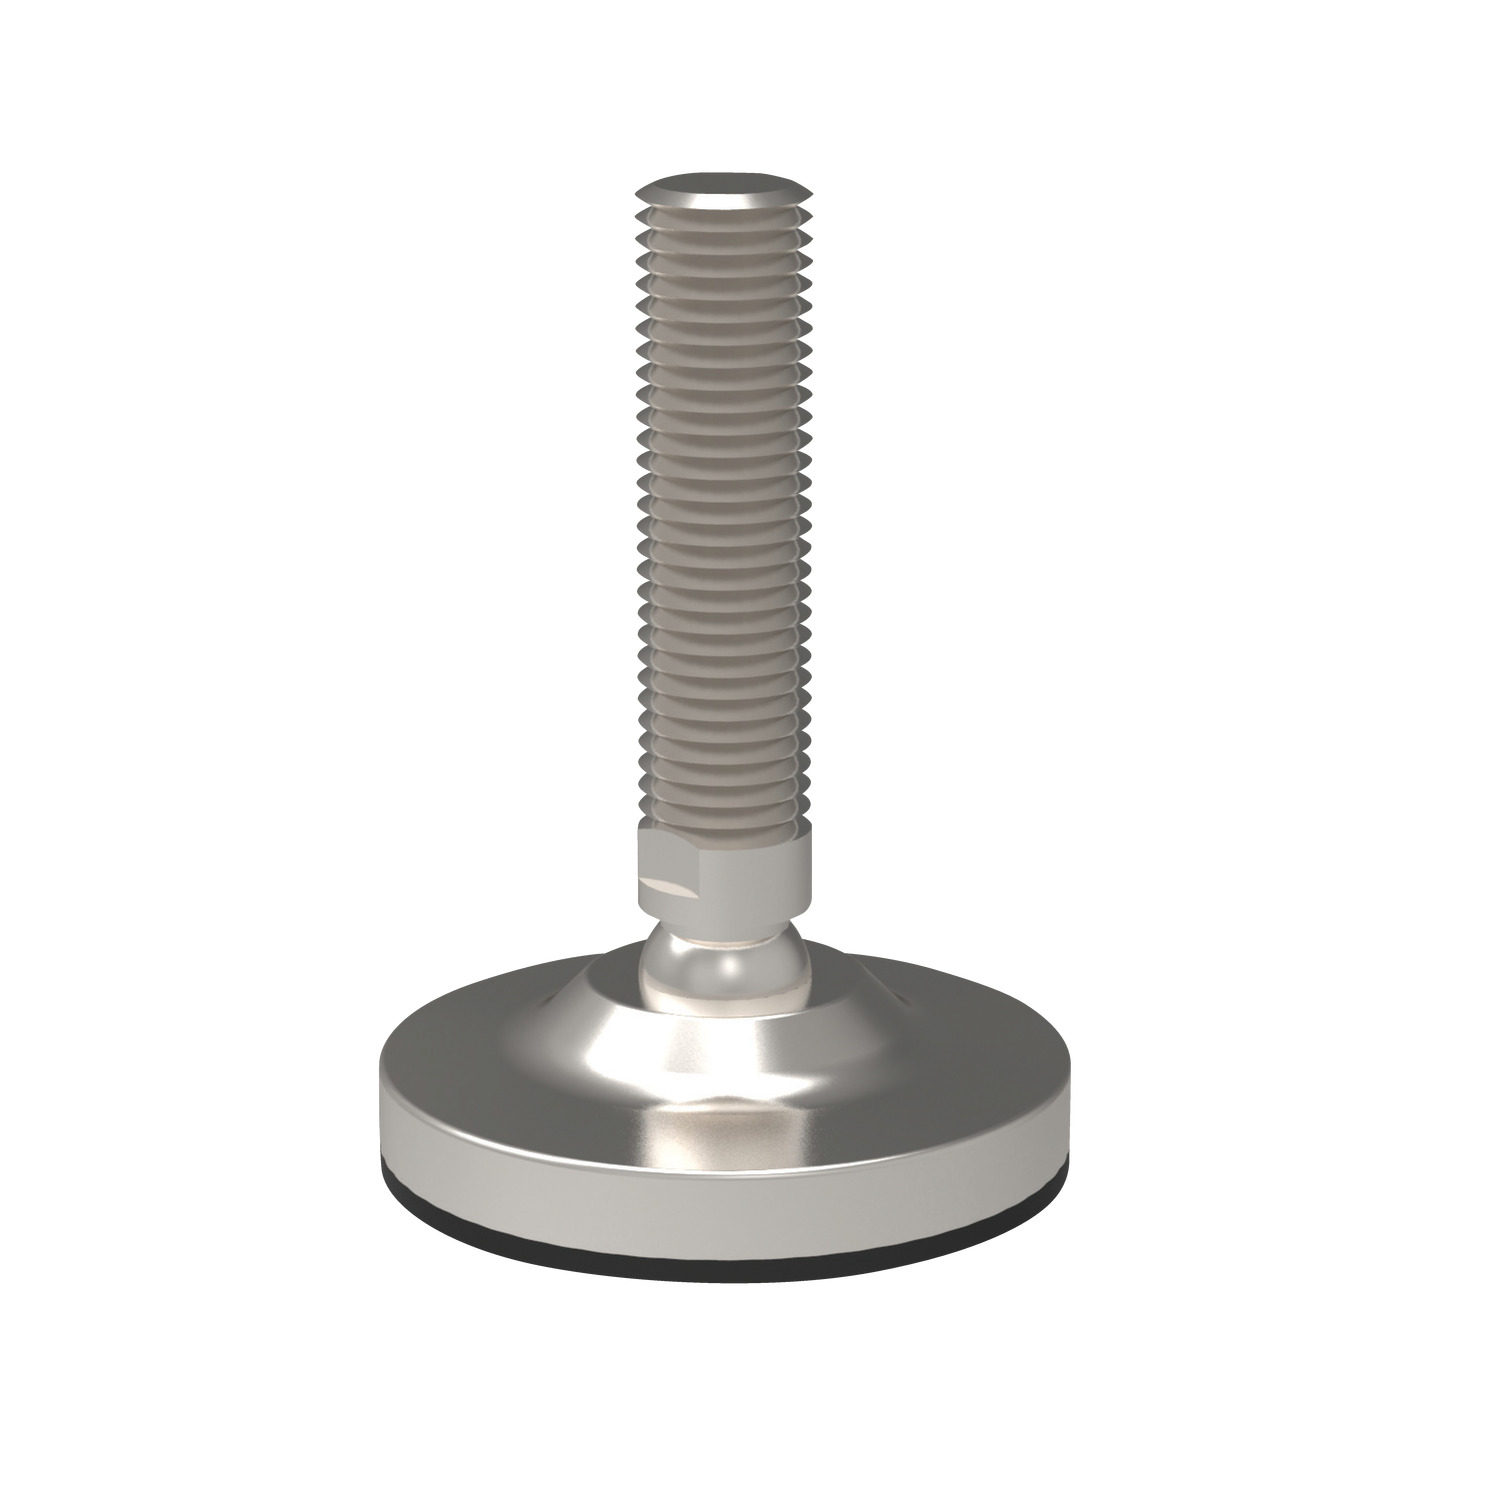 34614.W0800 Mini Levelling Feet - Stainless Steel Stainless Steel - 40mm pad - M8 x 25mm thread